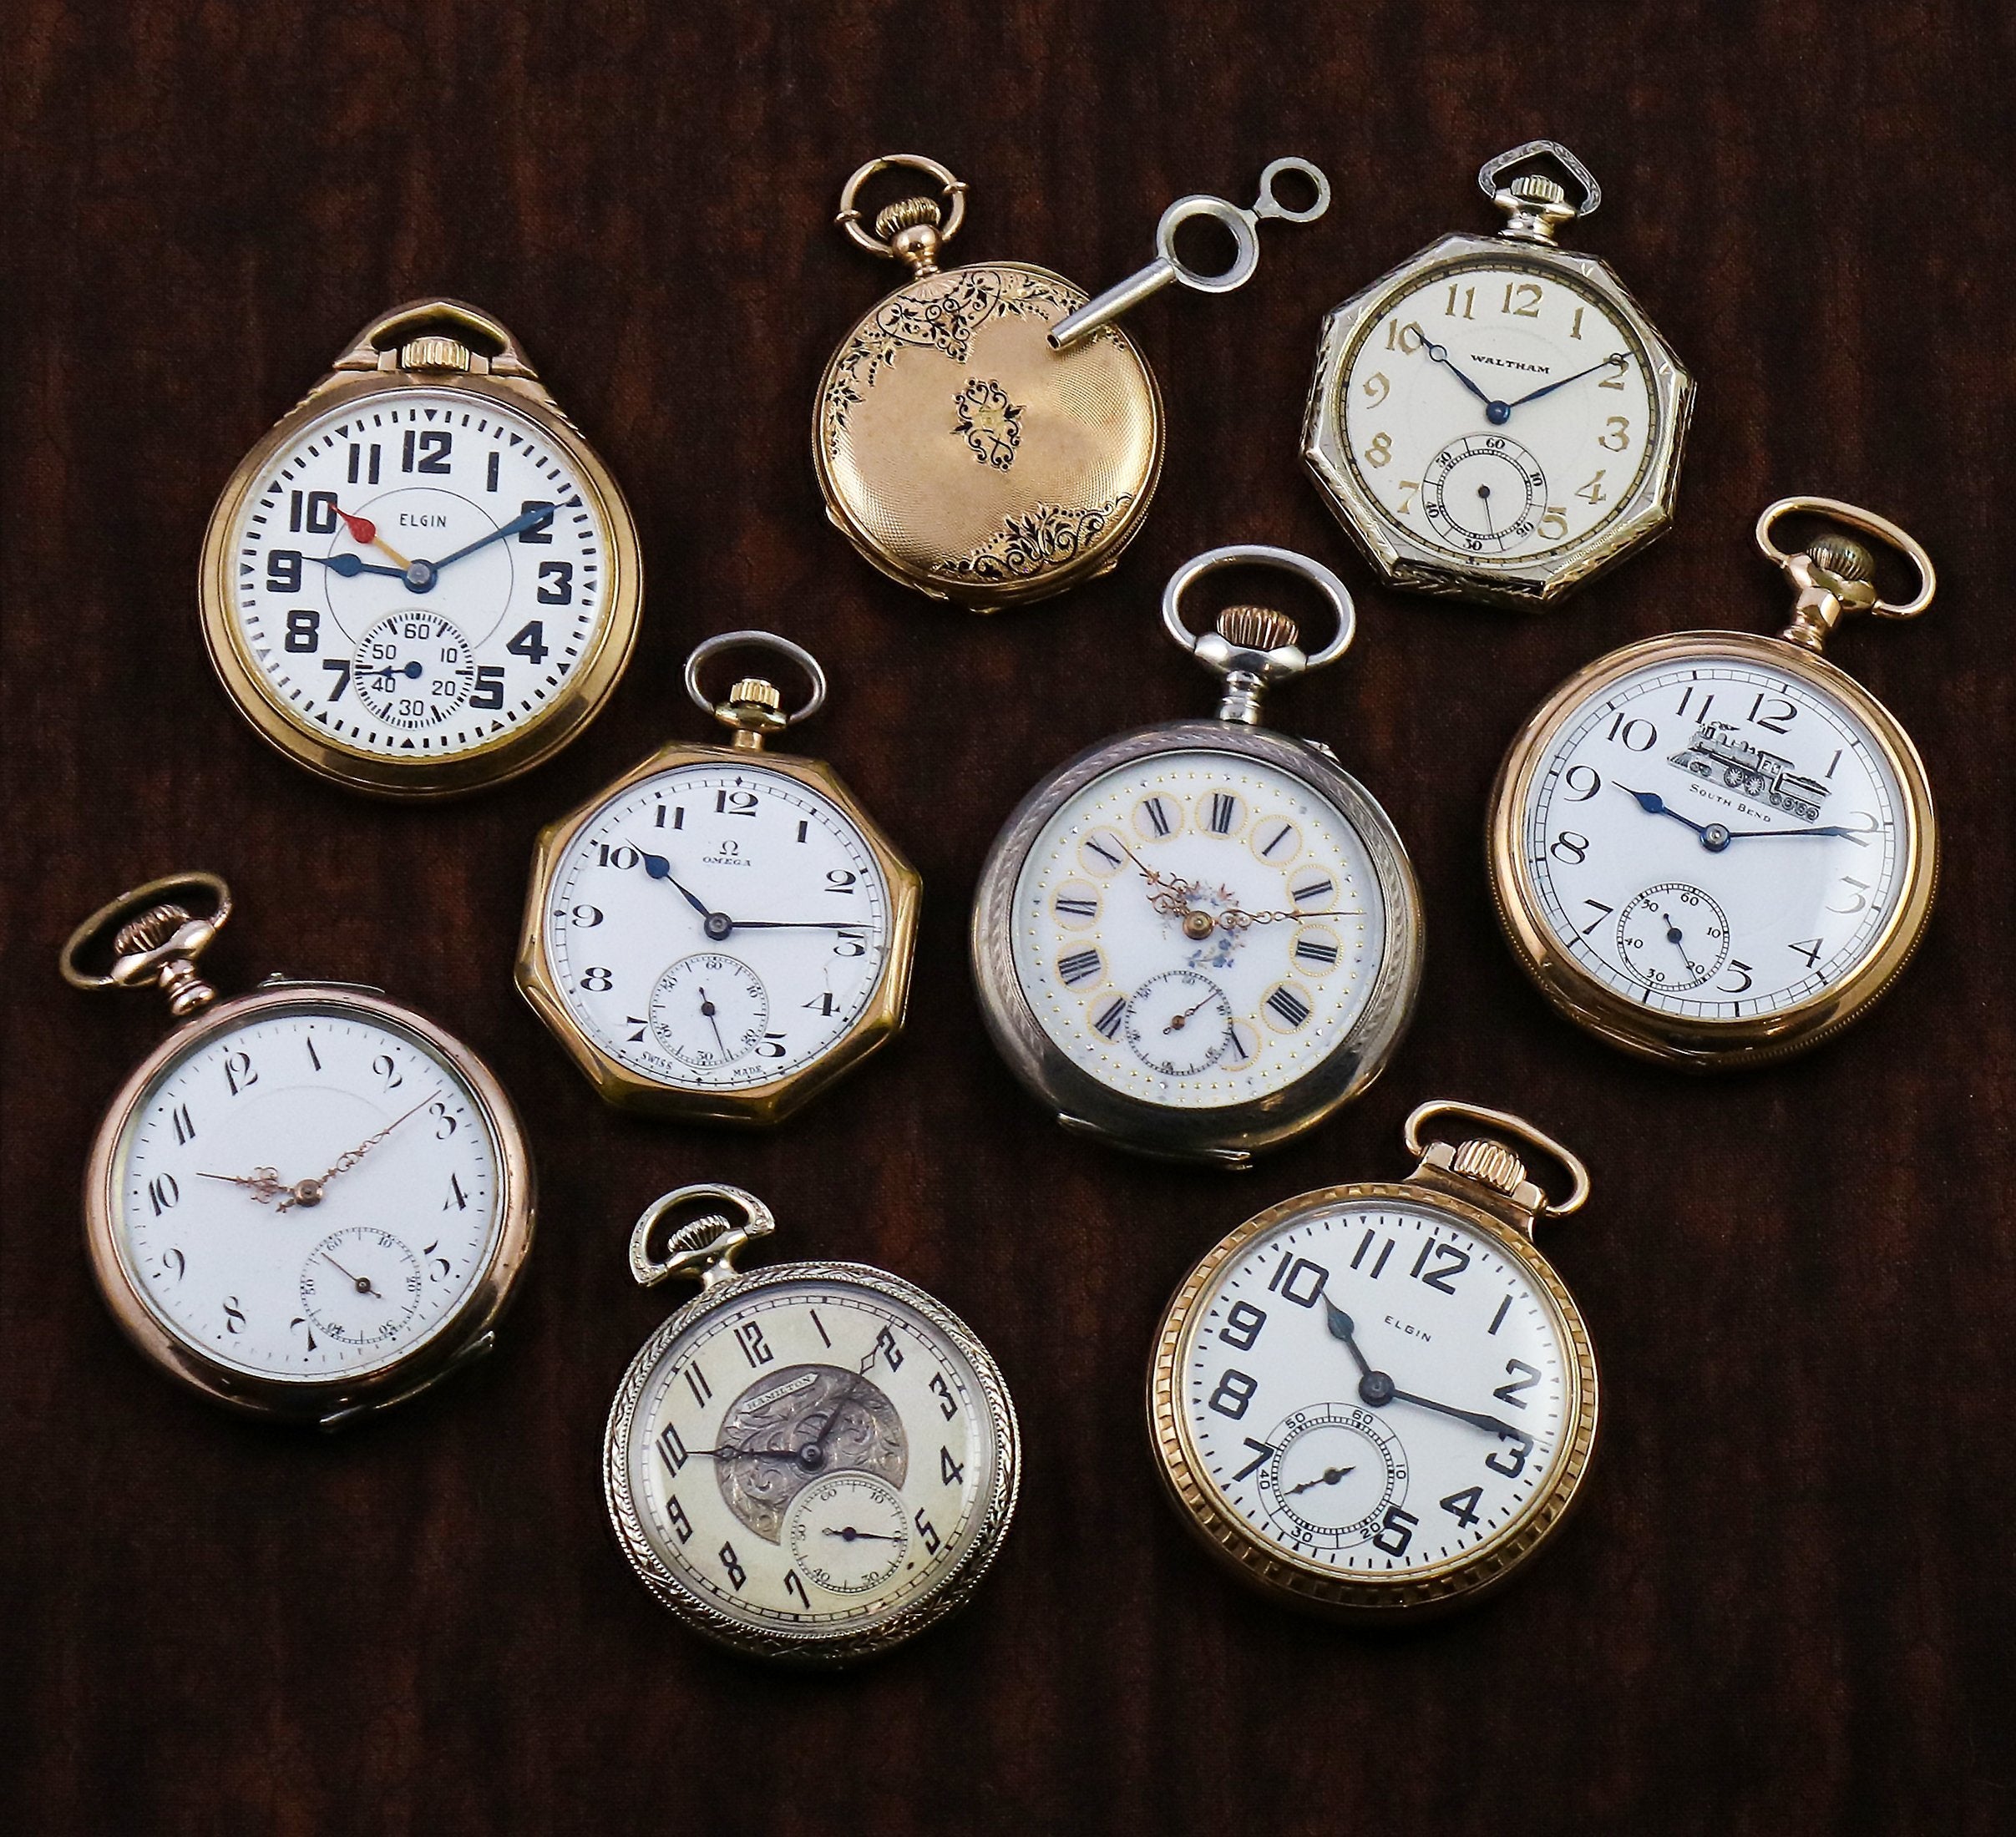 George W. Chatterton™ Lincoln Pocket Watch